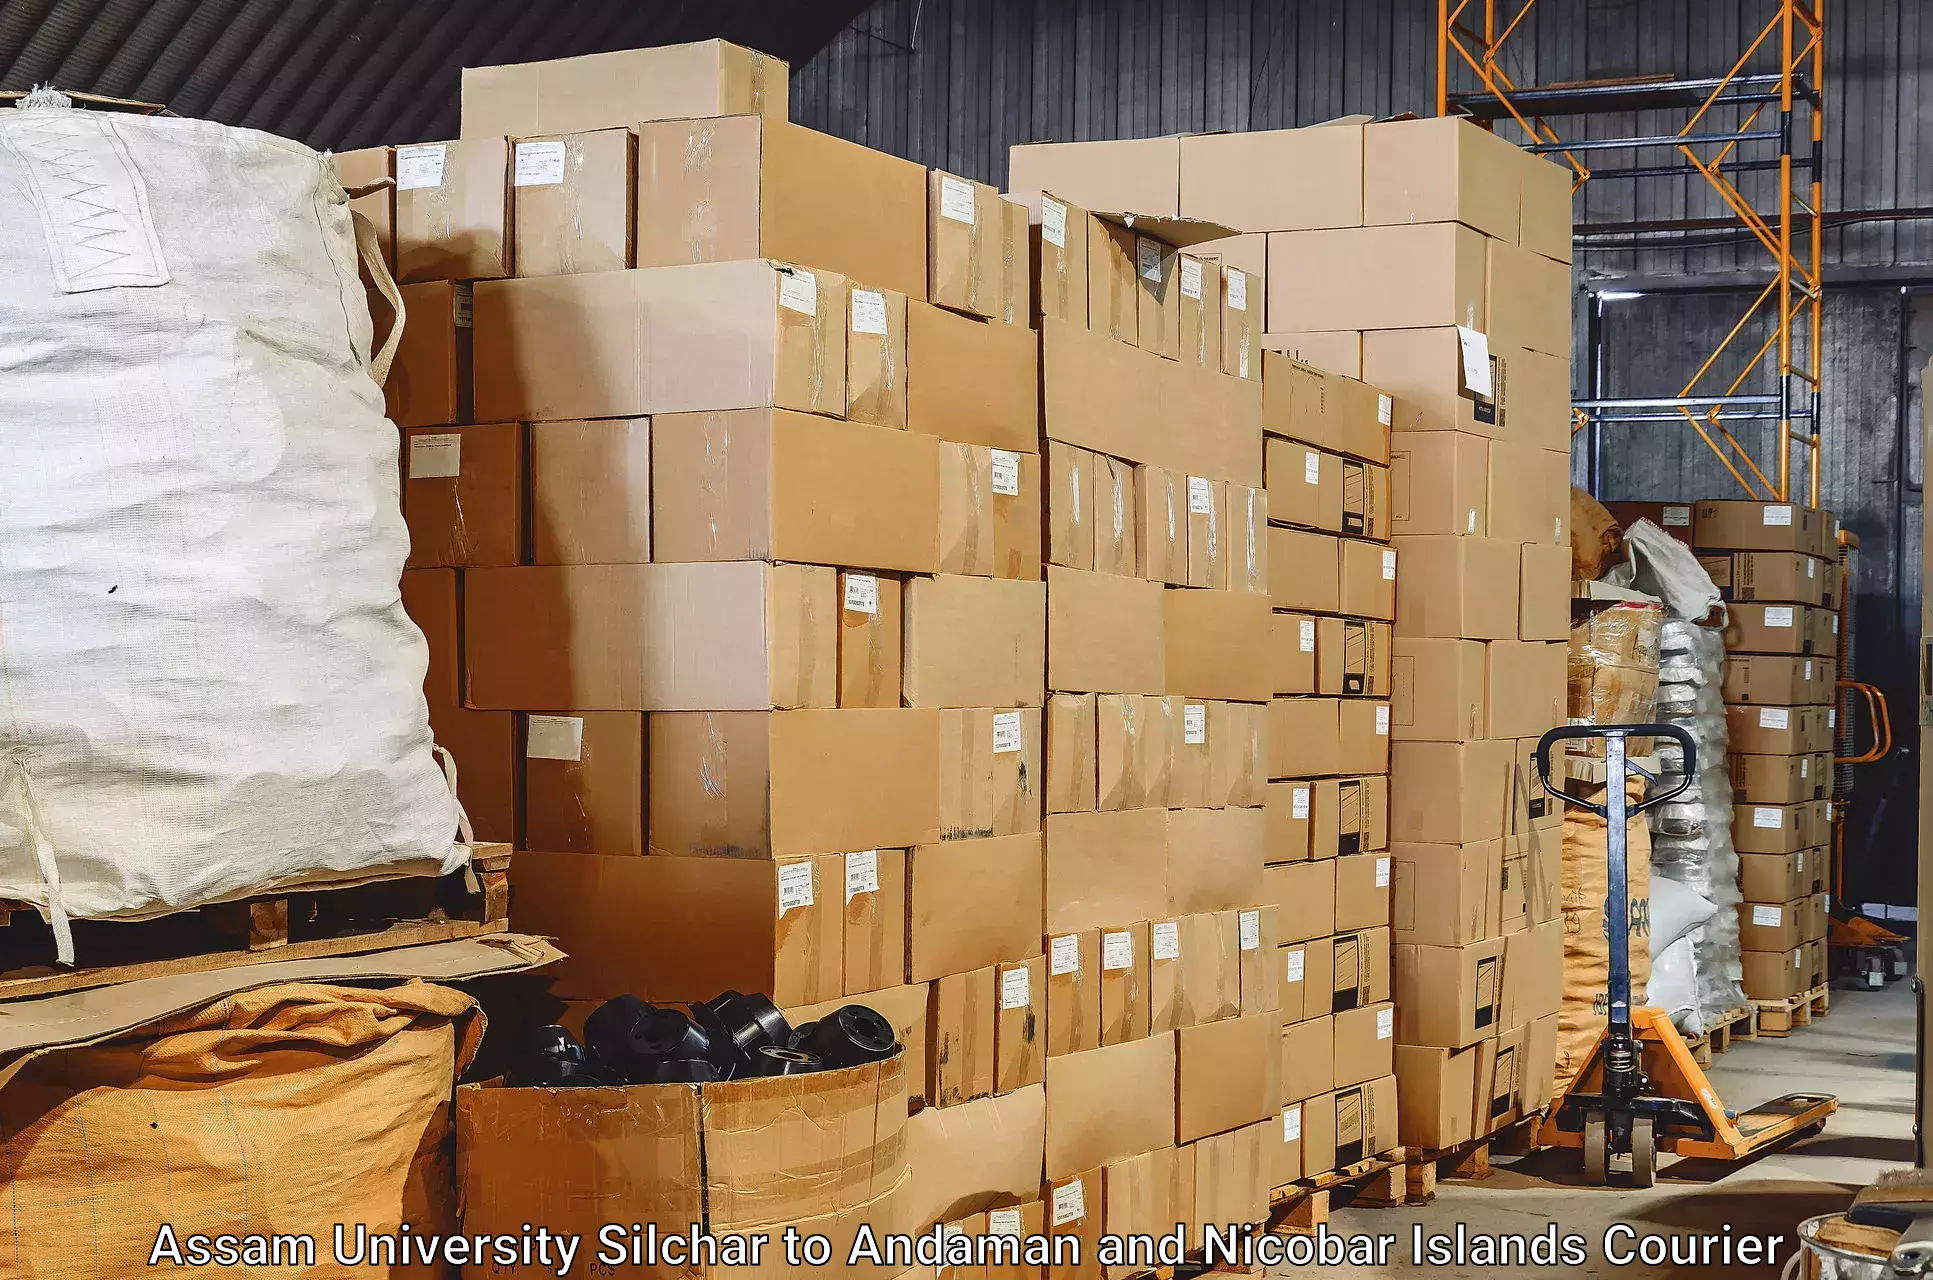 Baggage transport estimate in Assam University Silchar to South Andaman